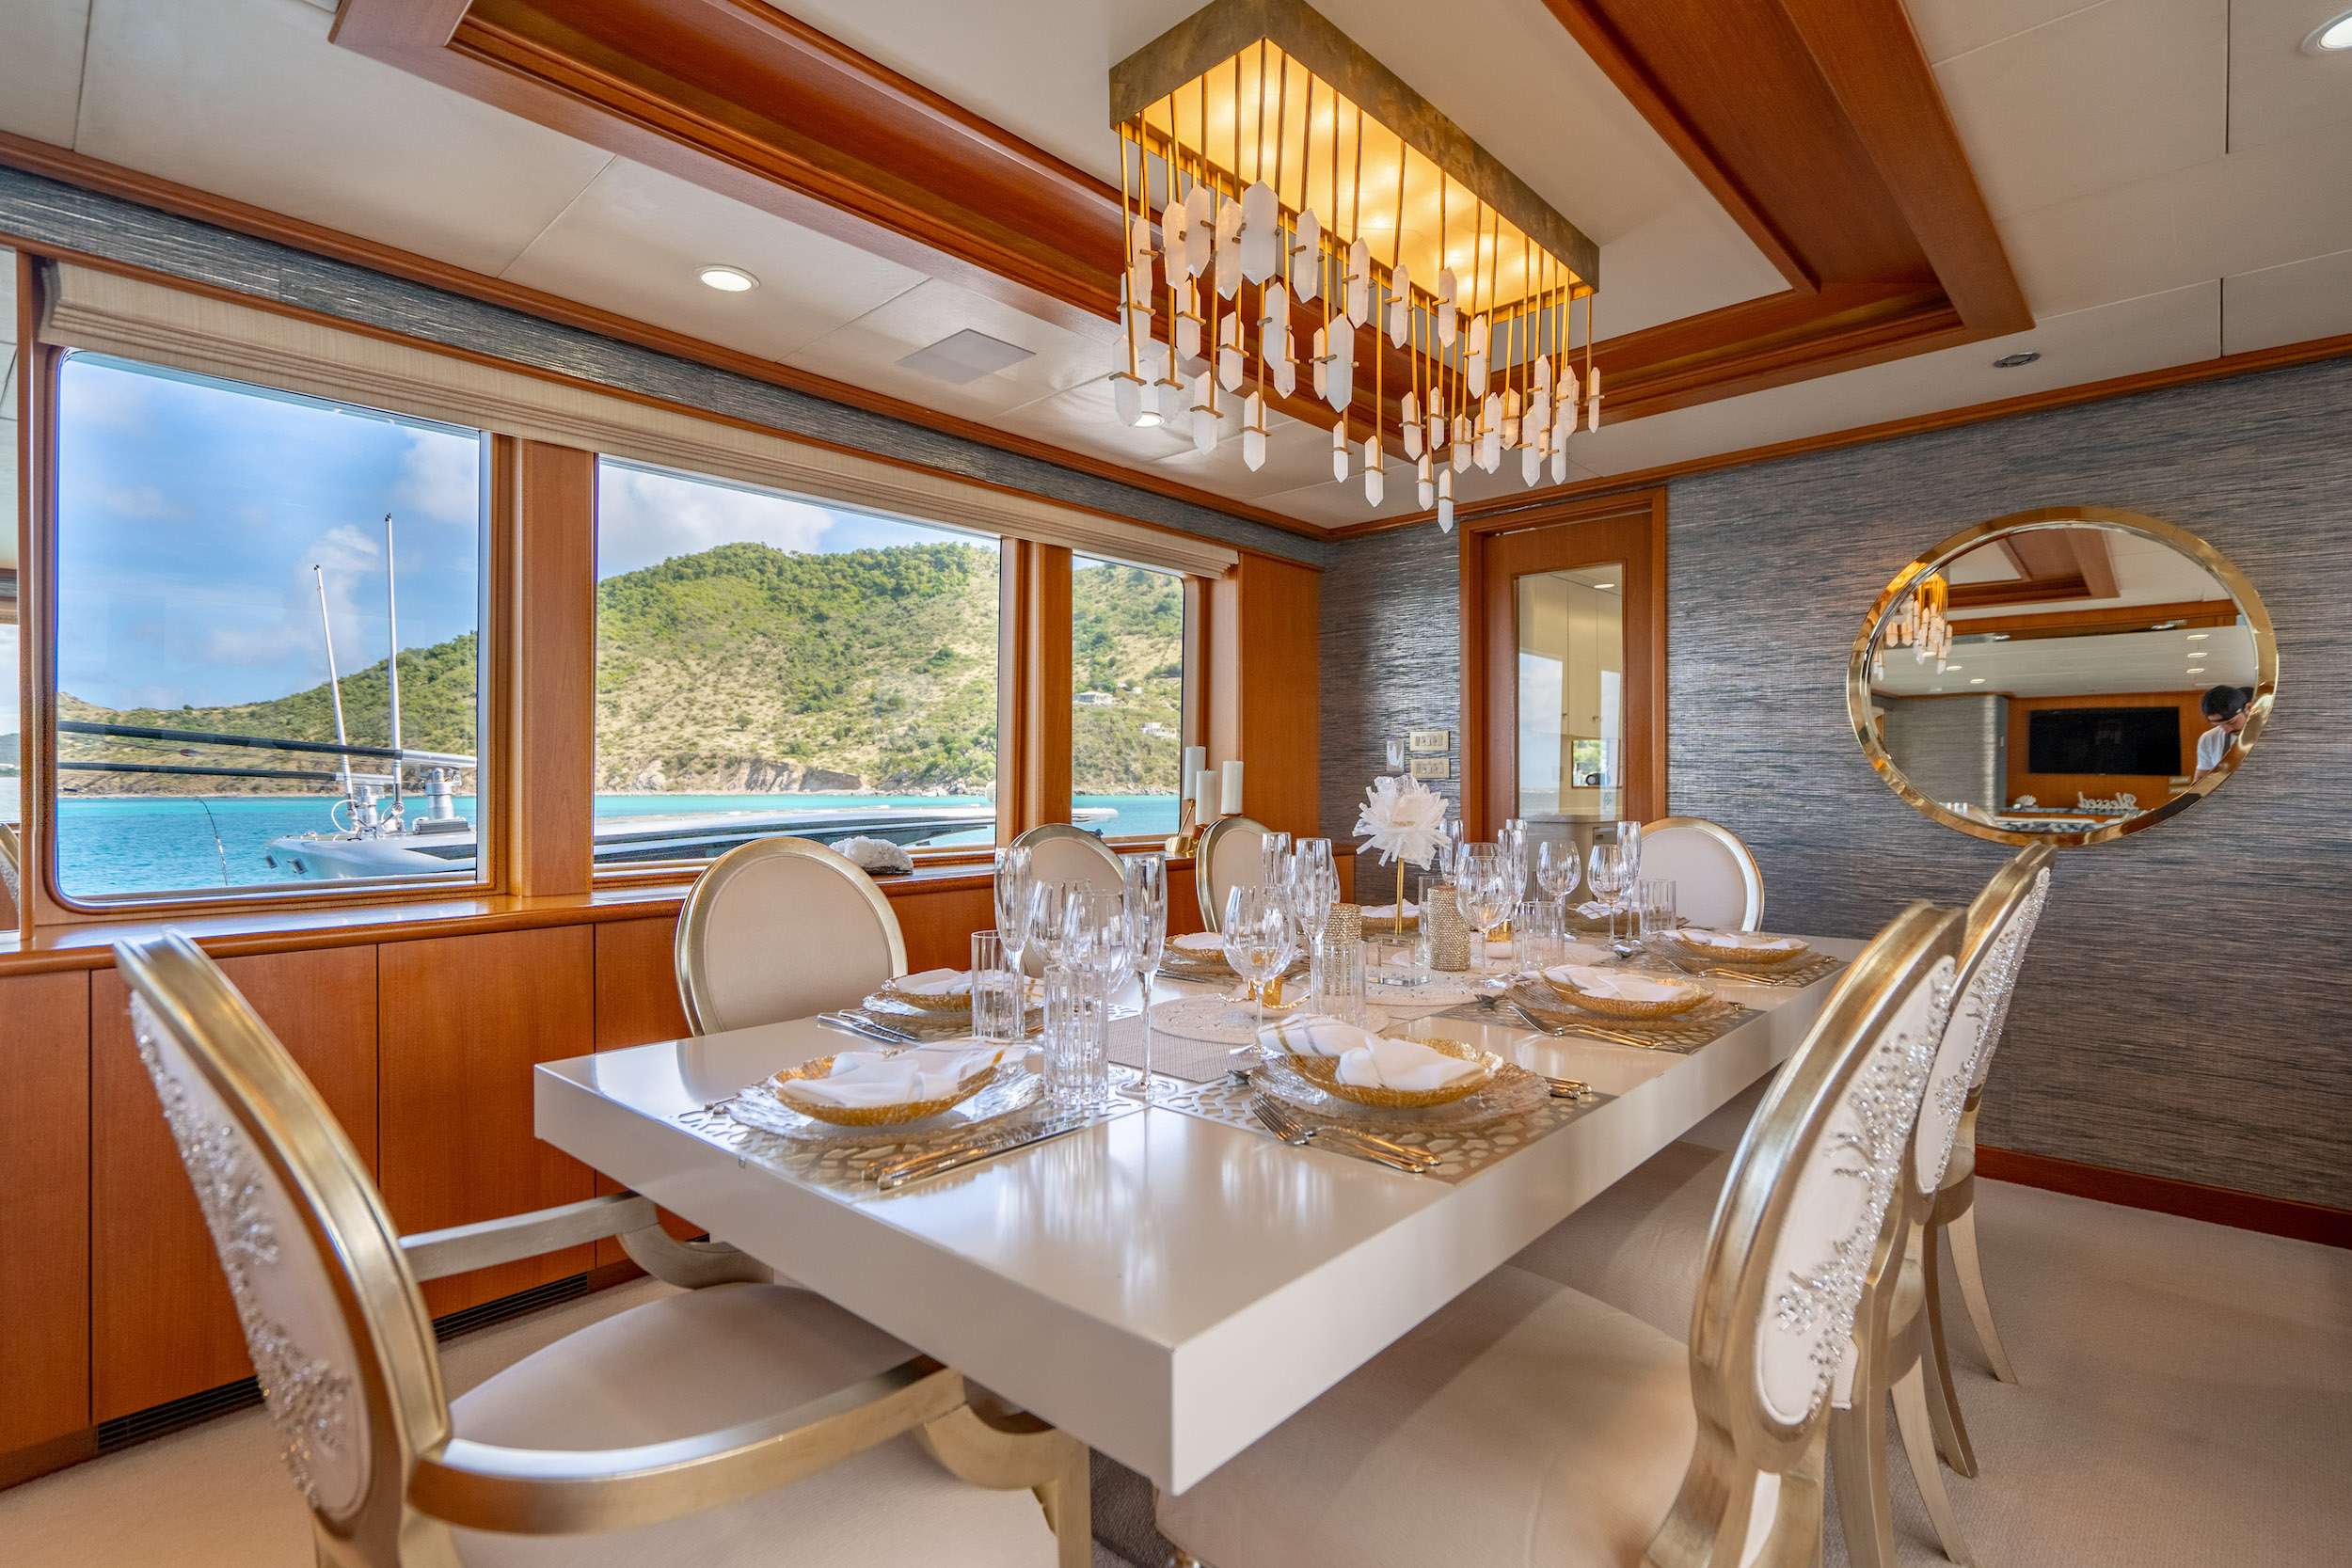 GALE WINDS Yacht Charter - Formal Dining